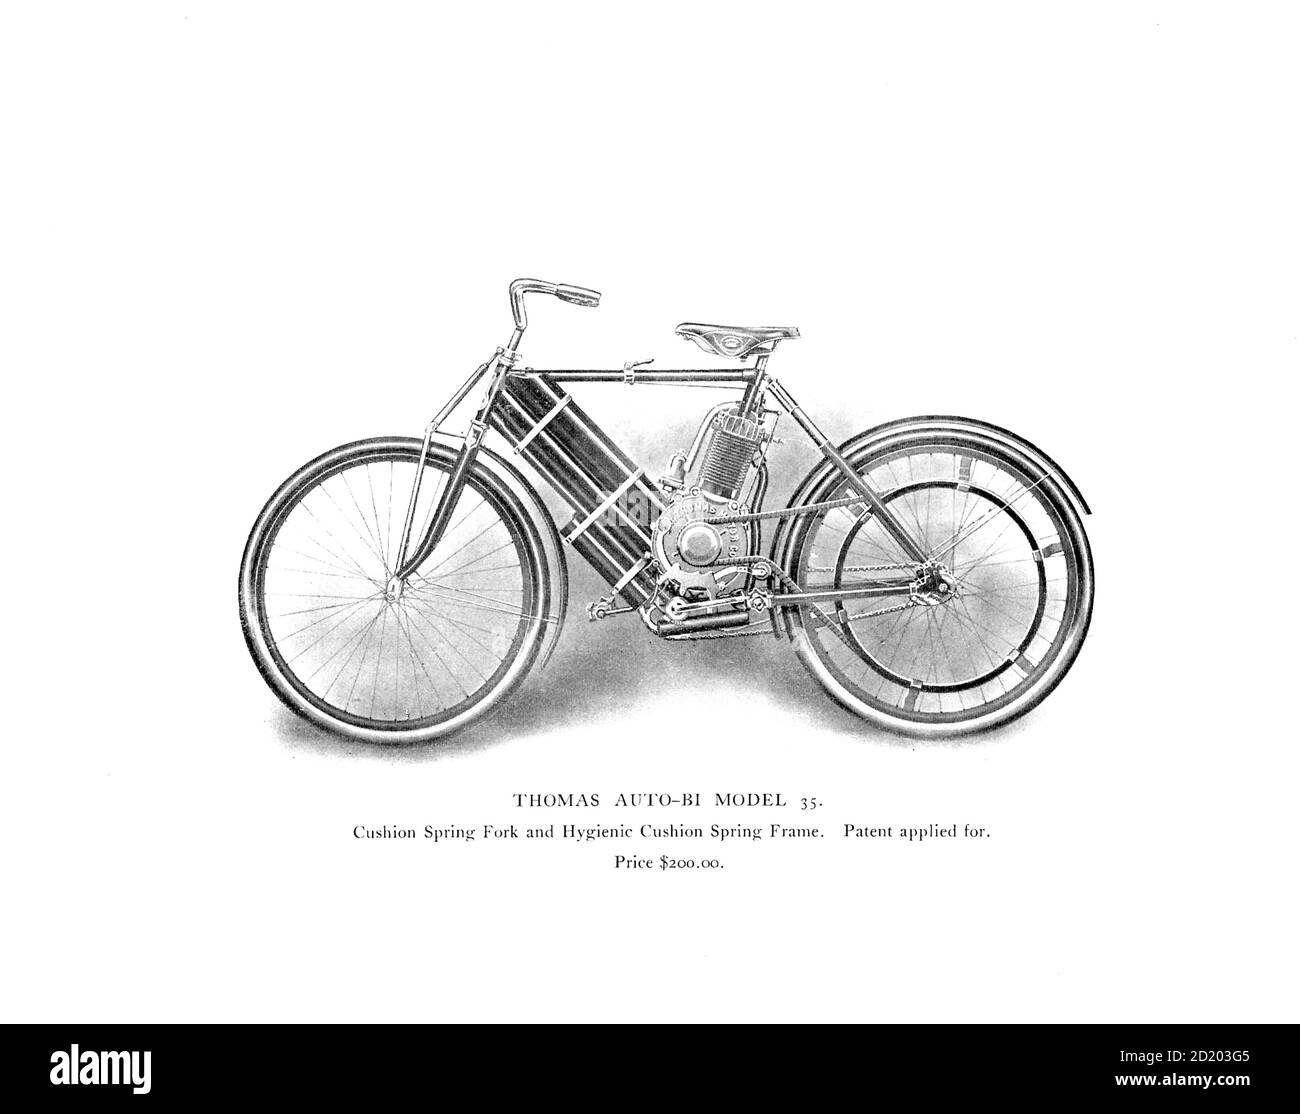 Thomas Auto-BI Model 35 (Motorized Bicycle) with Cushion Spring fork From the E. R. Thomas Motor Co. Inc Advance Catalogue — Maker Of Automobiles and Auto-Bi Motorcycles — From Buffalo New York, USA, Printed 1903. E. R. Thomas Motor Company was a manufacturer of motorized bicycles, motorized tricycles, motorcycles, and automobiles in Buffalo, New York between 1900 and 1919 Stock Photo